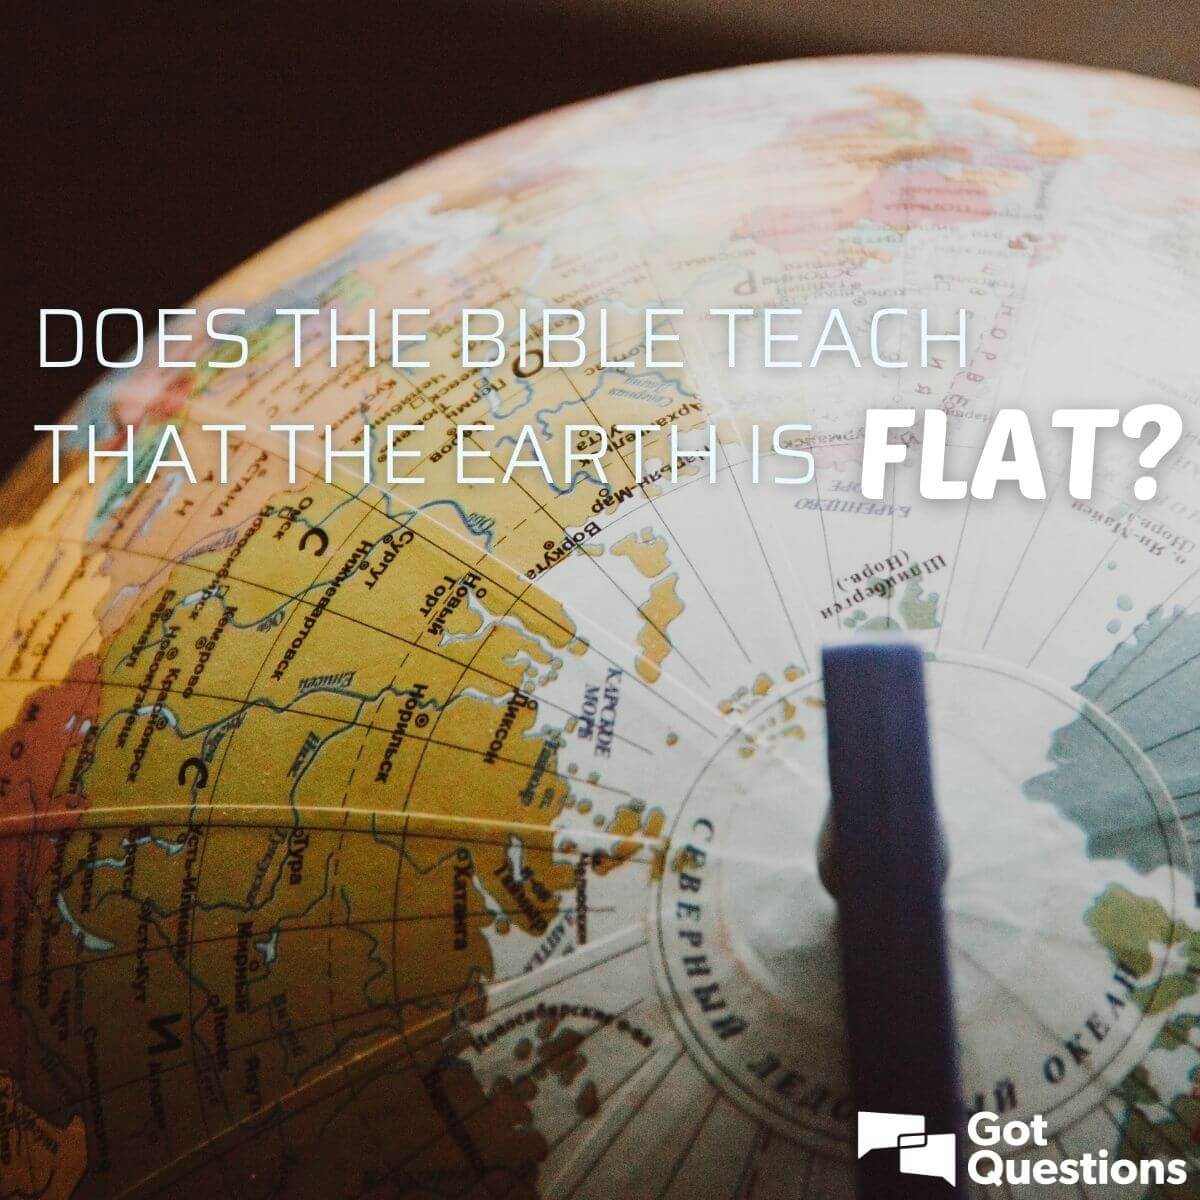 bible says the earth is flat